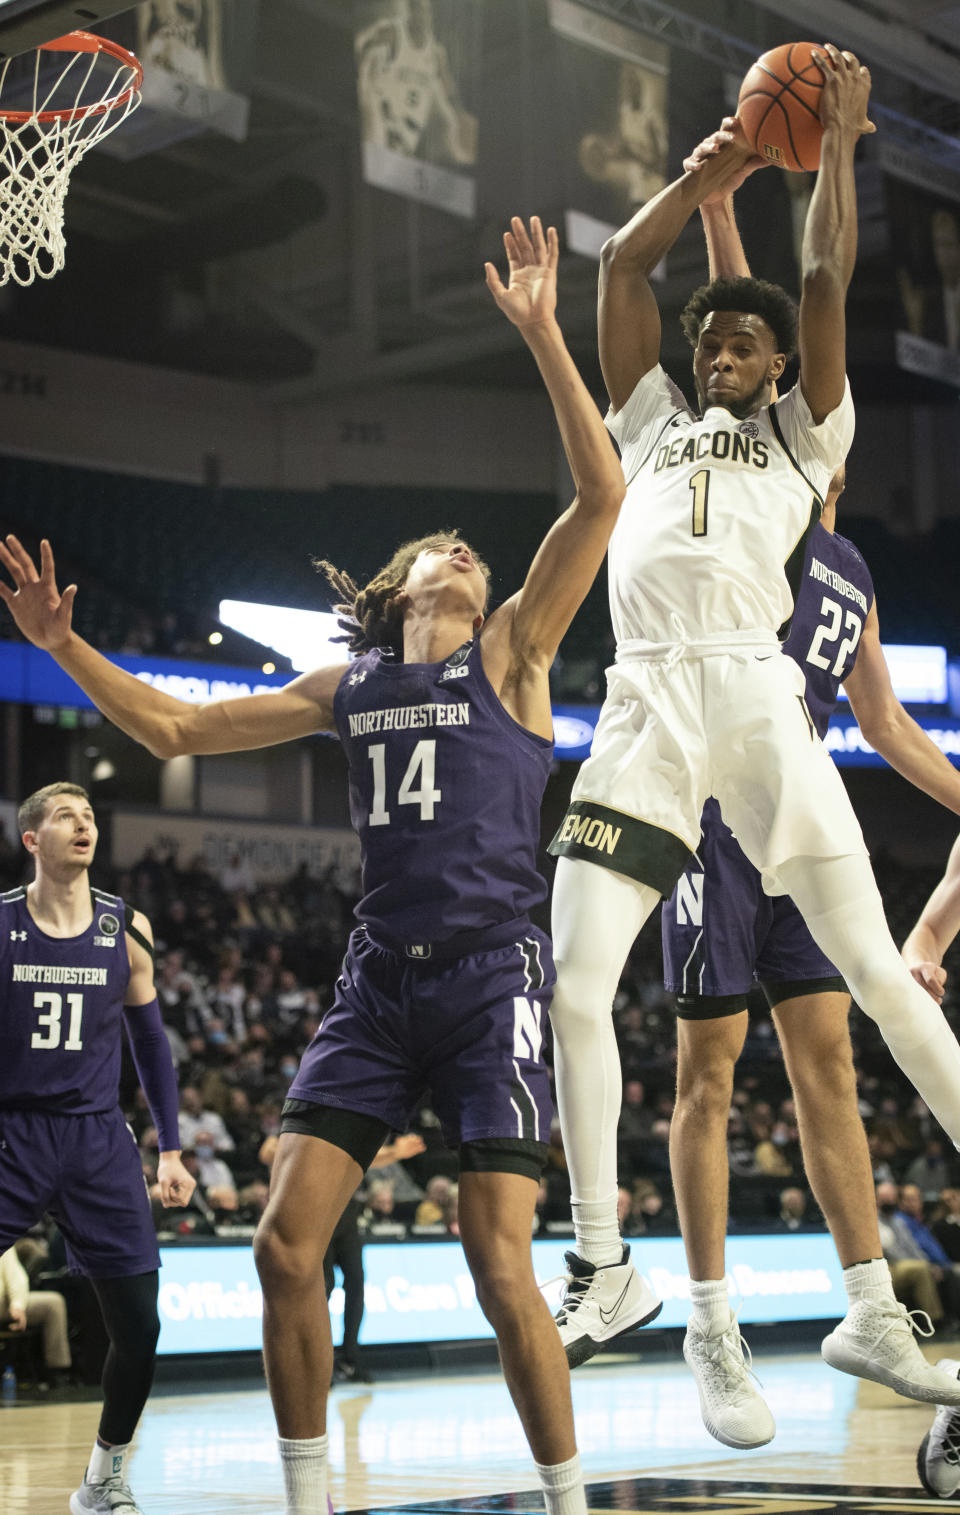 Wake Forest forward Isaiah Mucius (1) grabs a rebound over Northwestern guard Casey Simmons (14) in the first half of an NCAA college basketball game on Tuesday, Nov. 30, 2021, at the Joel Coliseum in Winston-Salem, N.C. (Allison Lee Isley/The Winston-Salem Journal via AP)